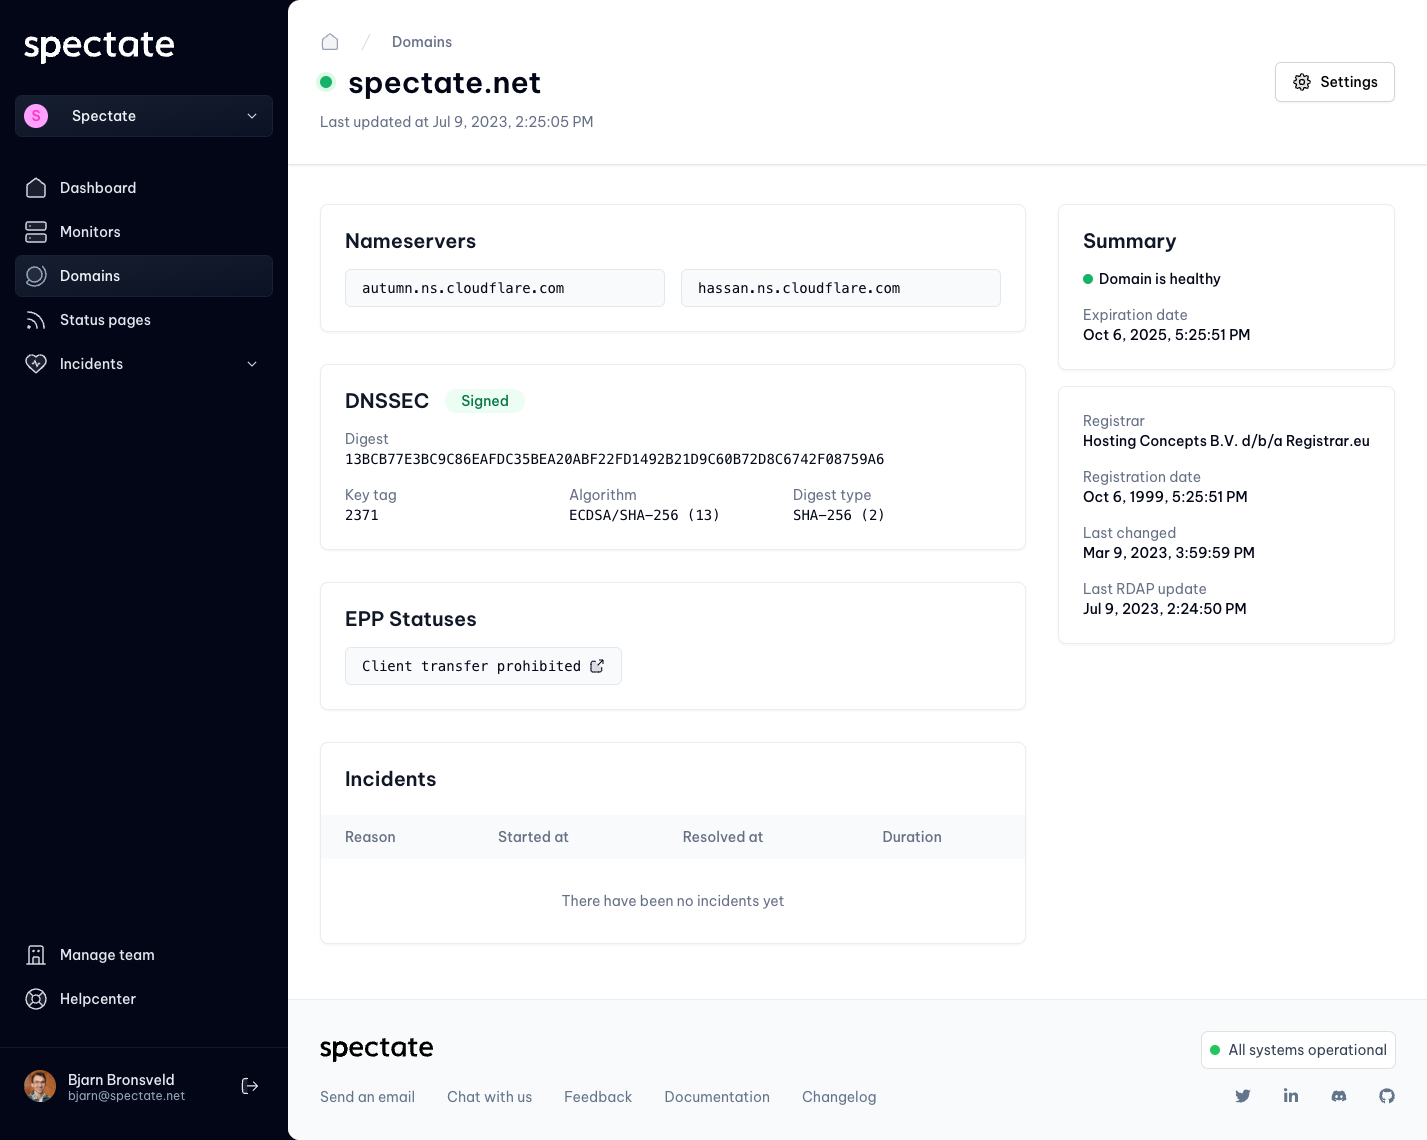 A screenshot of the Spectate domain monitoring dashboard